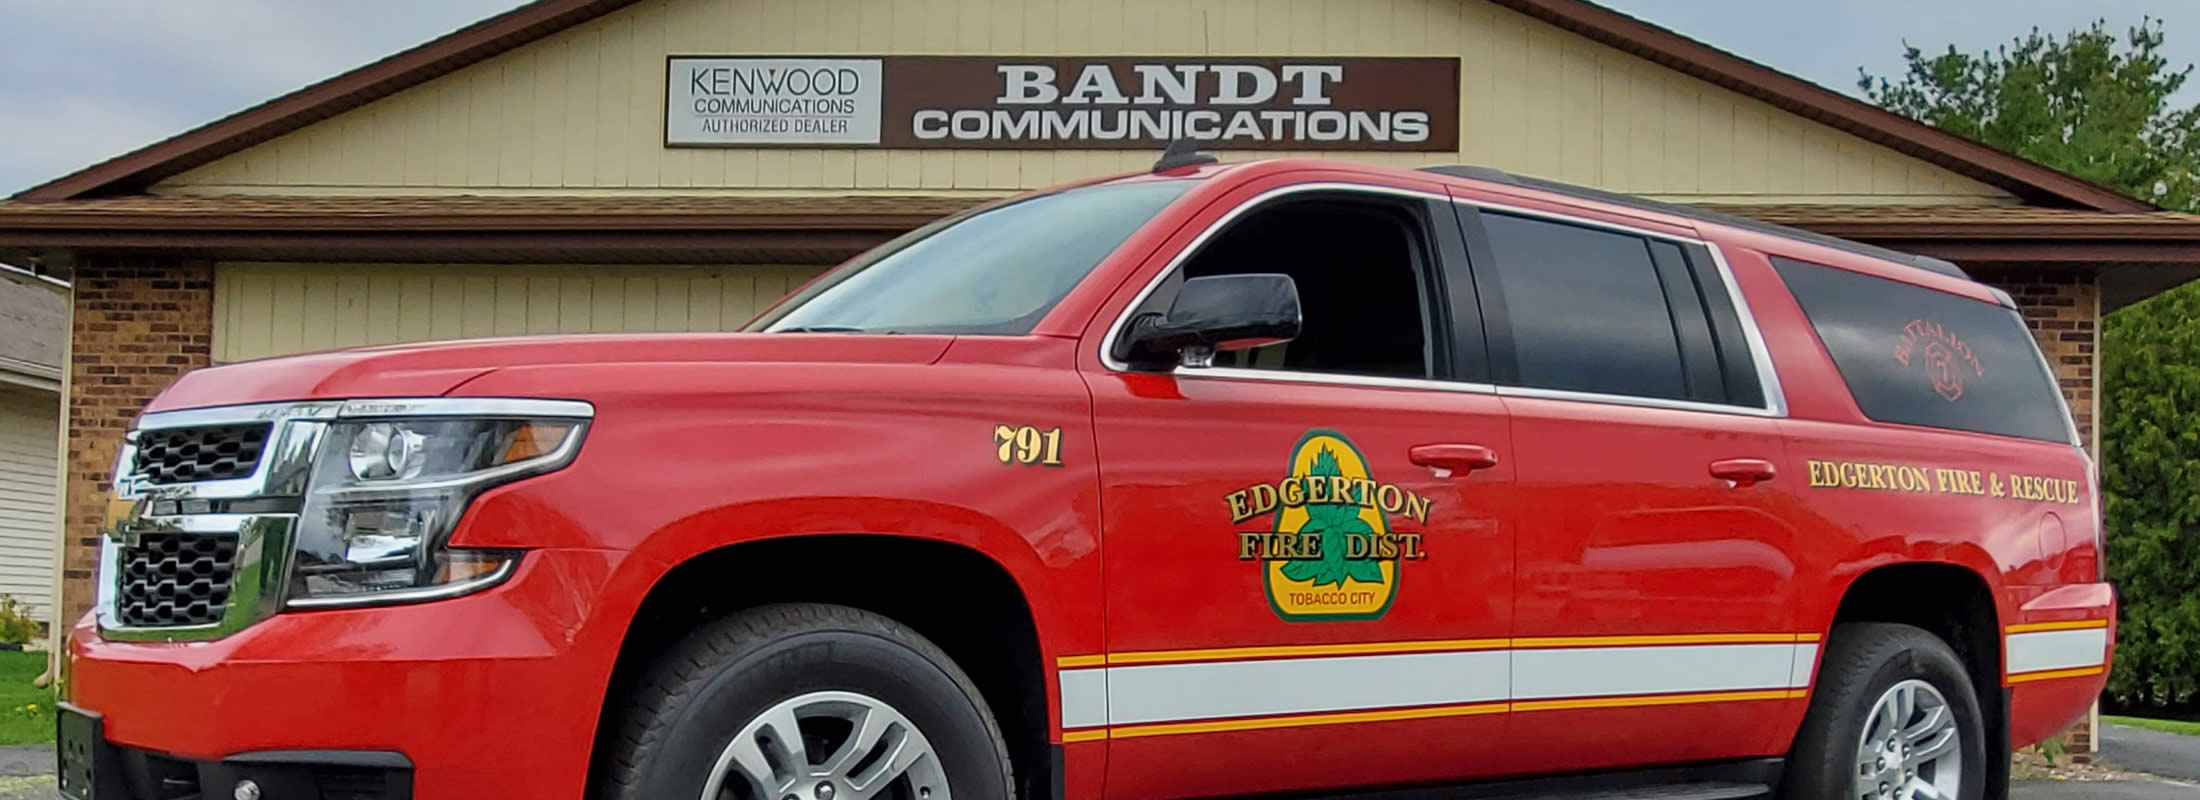 Bandt Communications Wireless Technology / Two-Way Radios / Vehicle Outfitters Rockford IL